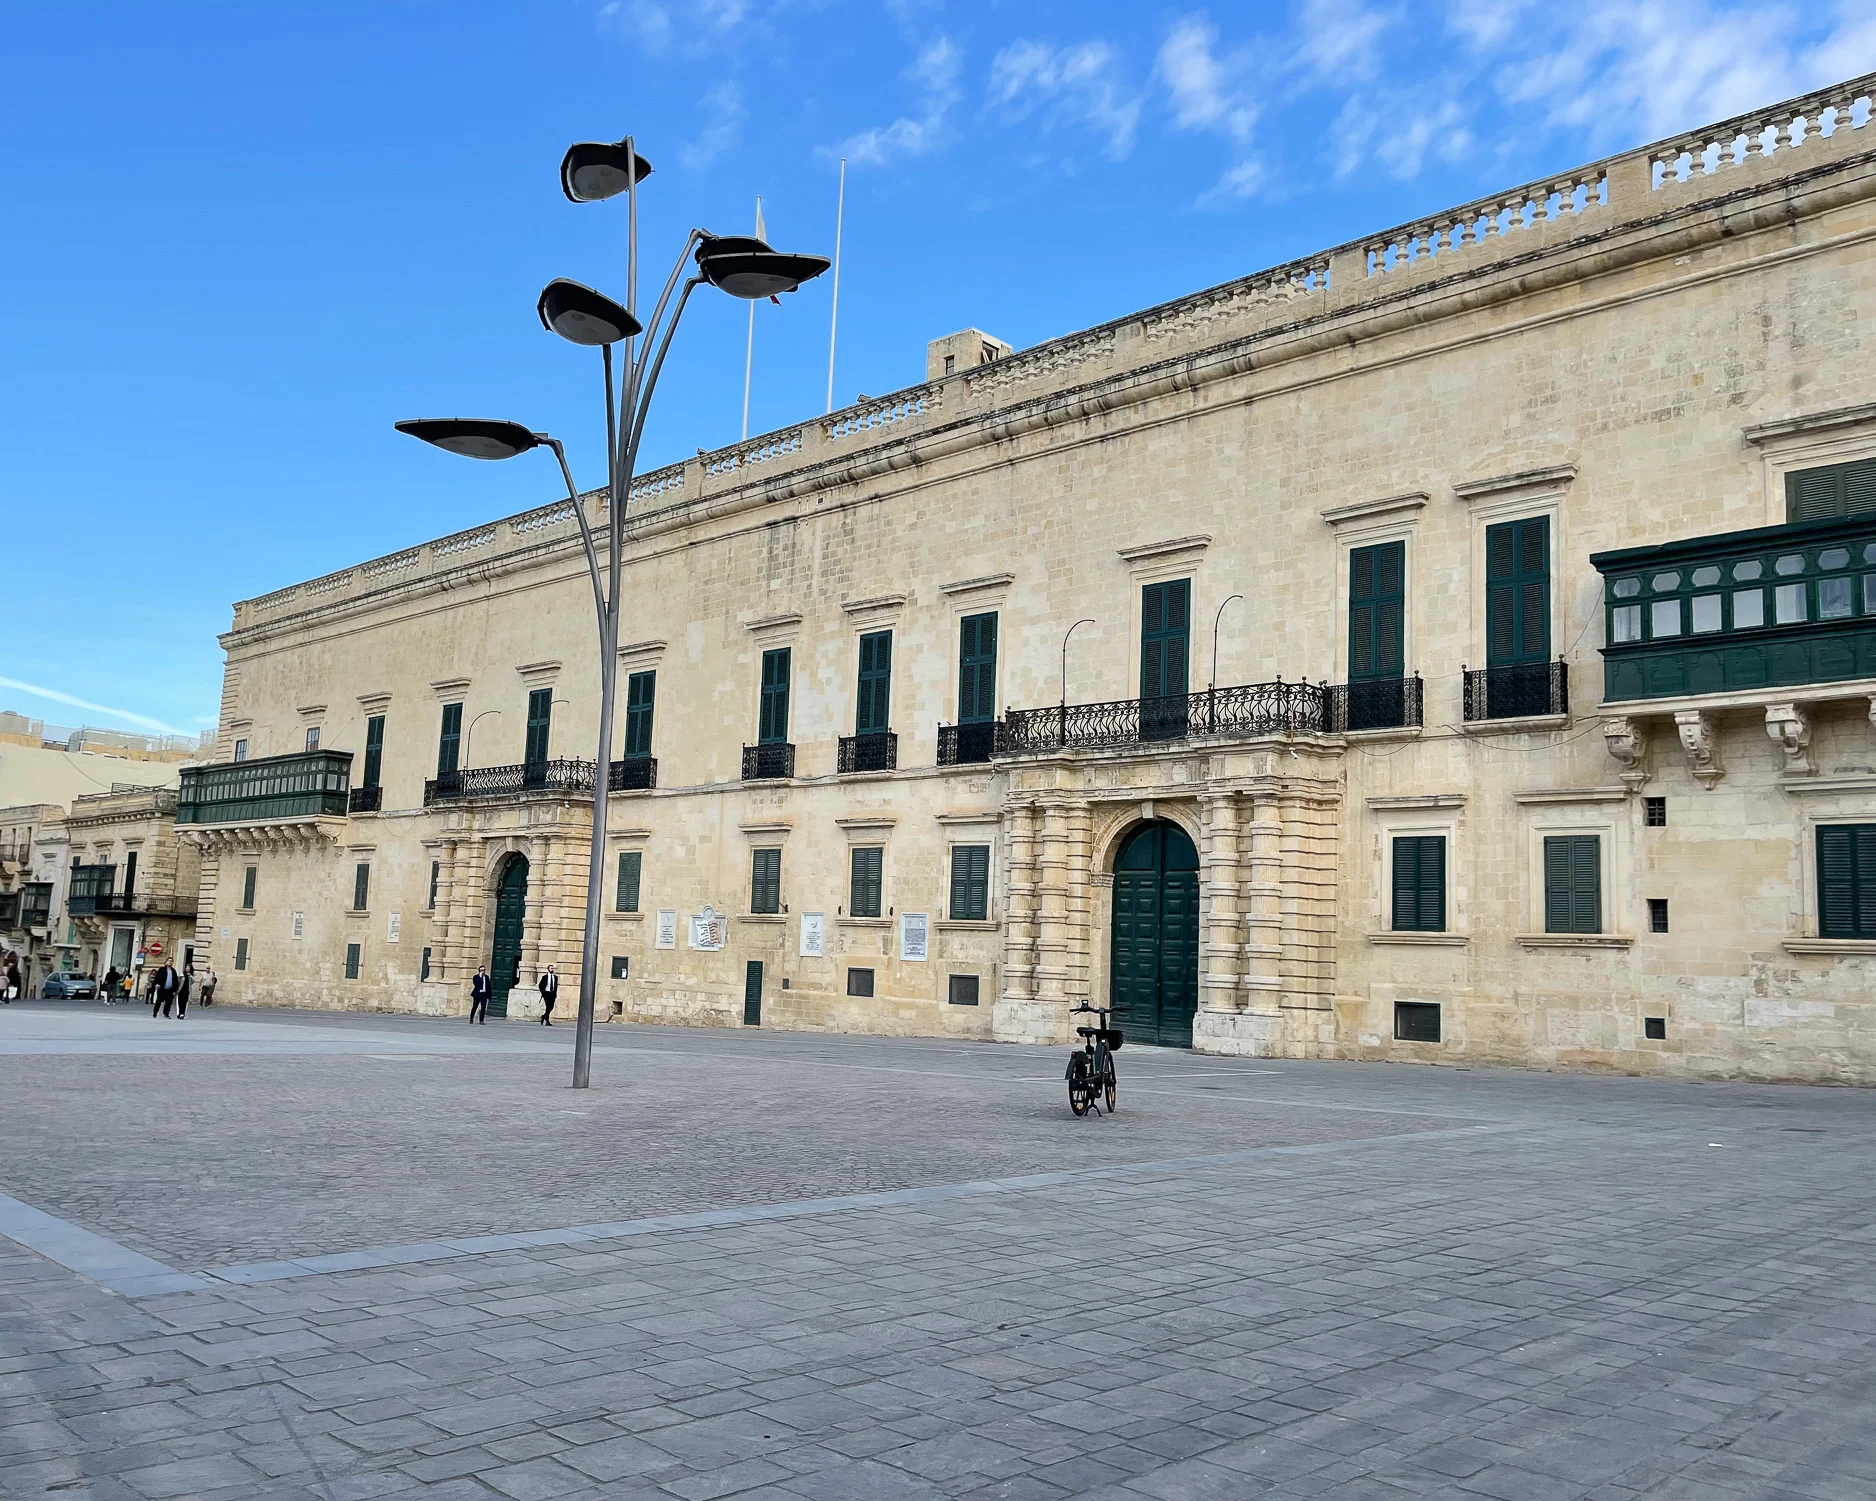 Grand Master's Palace, now the President's Palace, Valletta, Malta